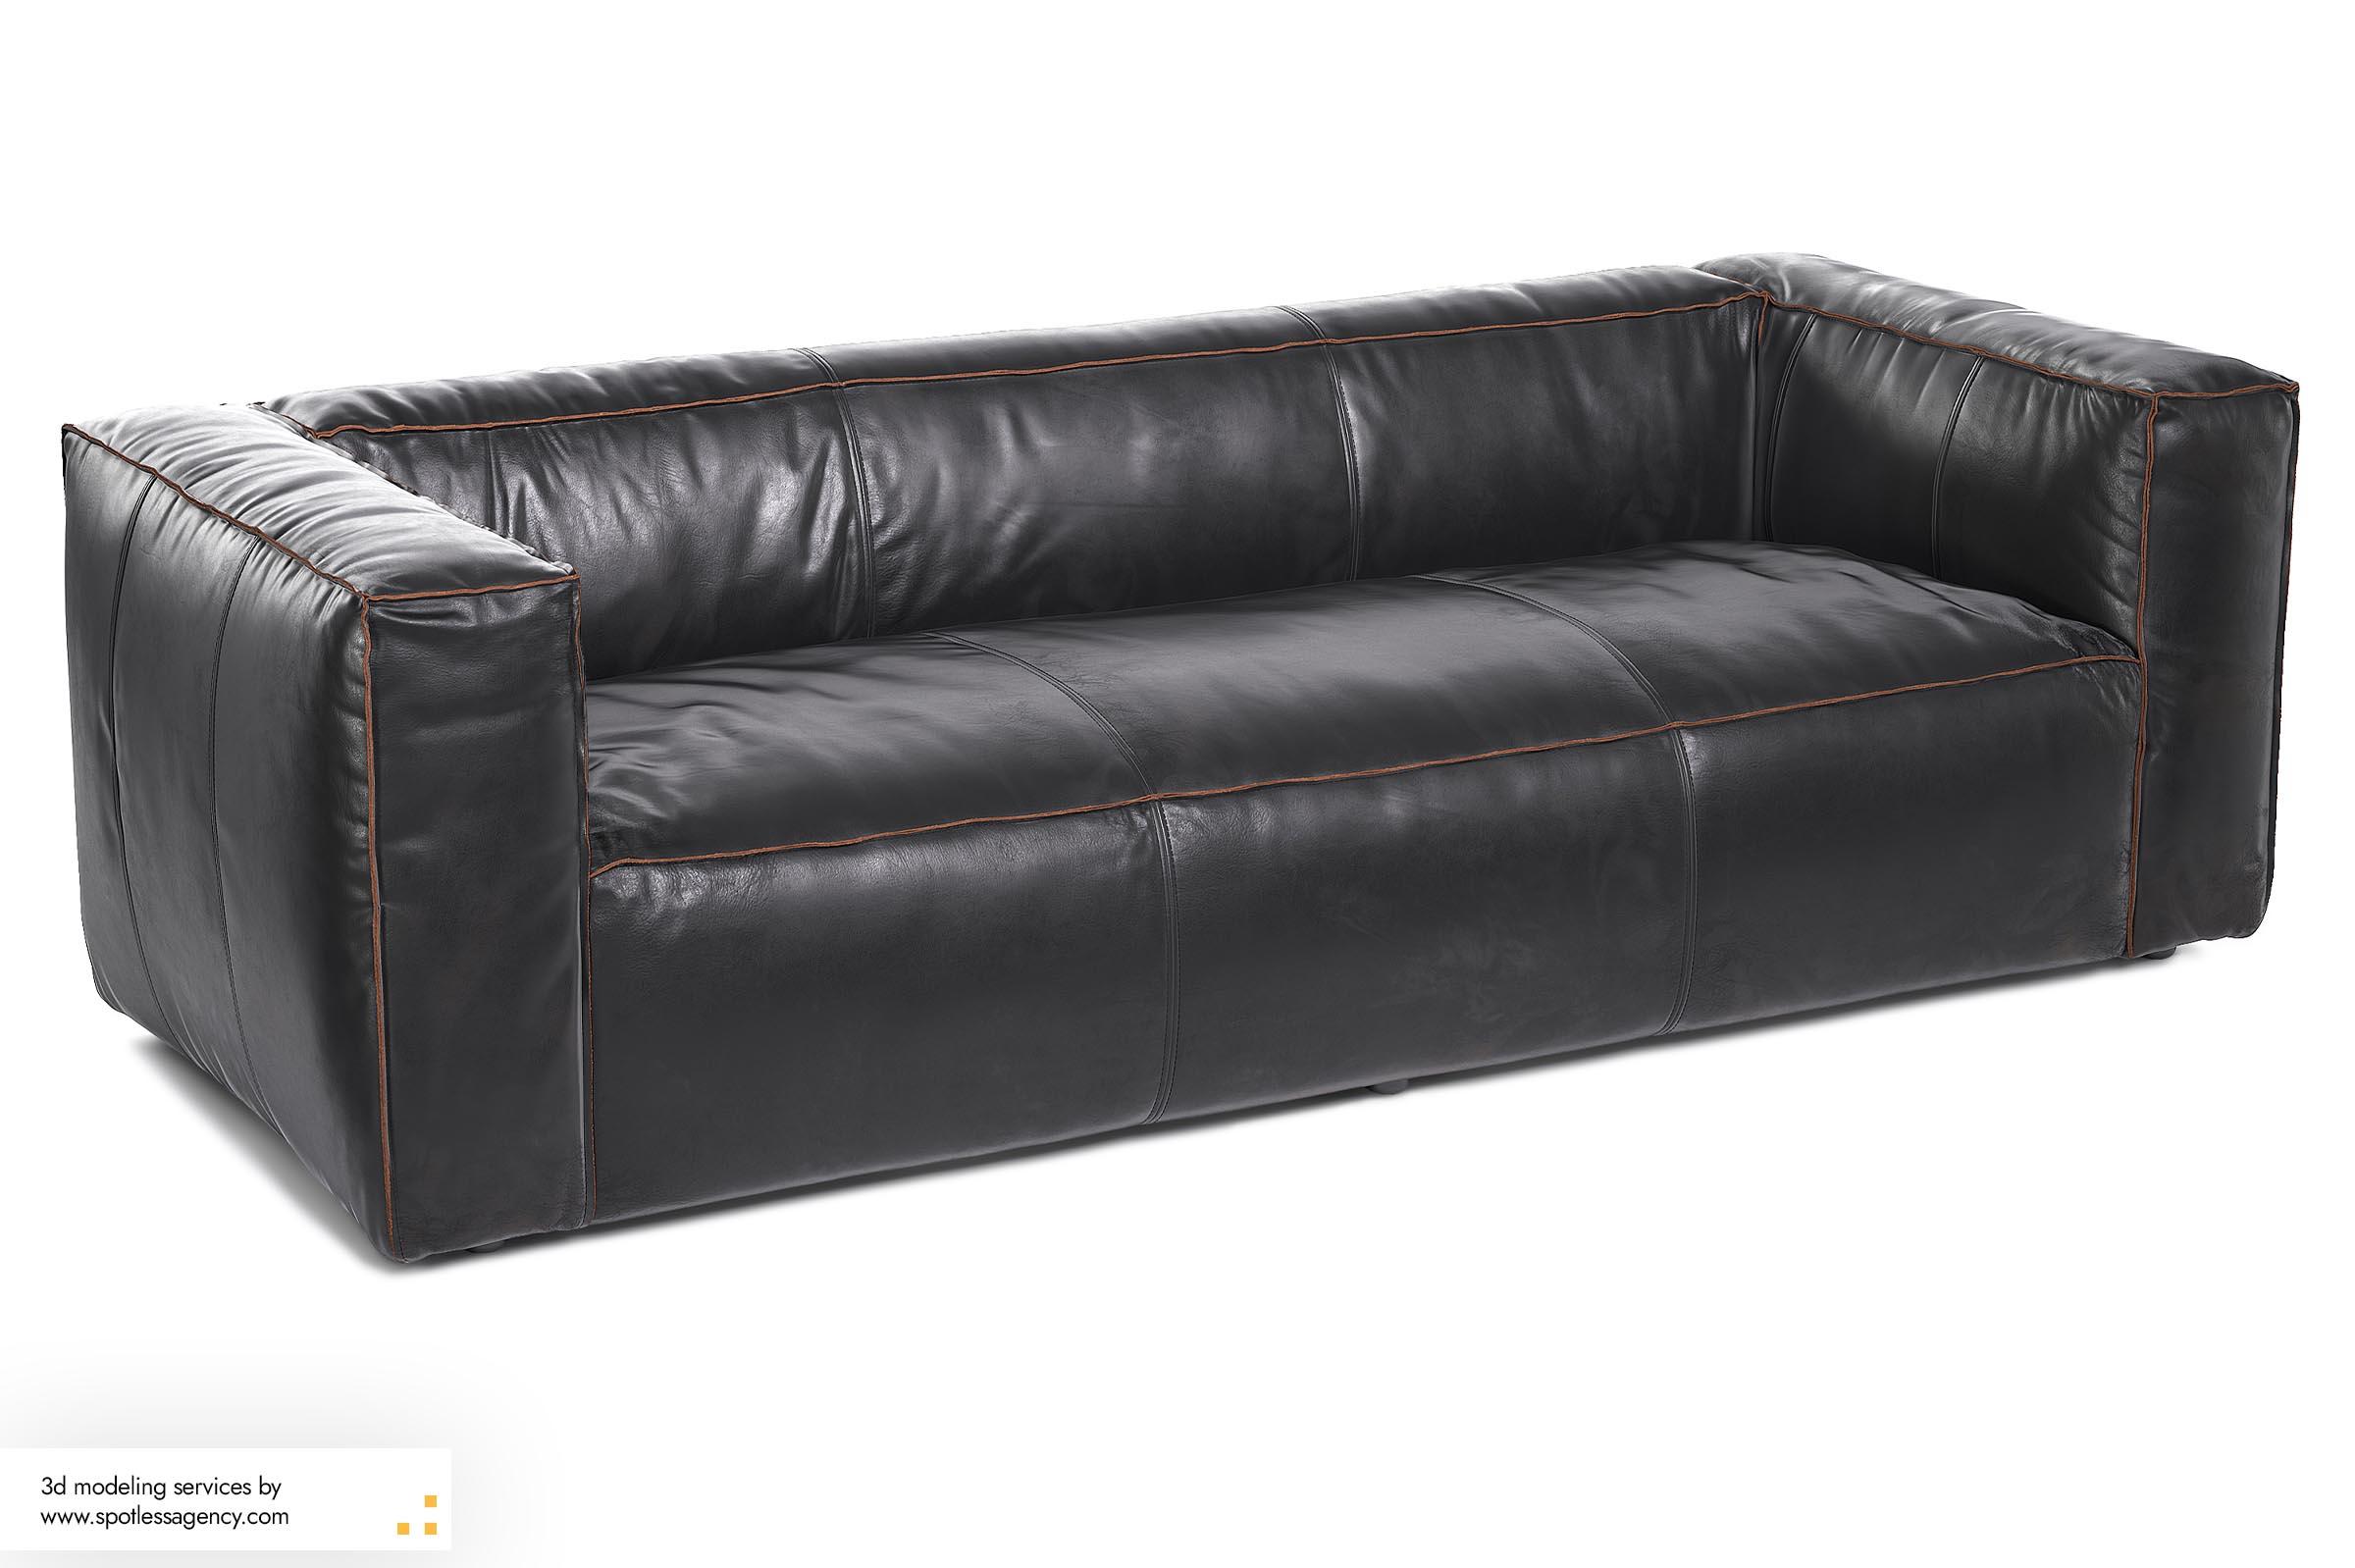 Sofas - 3d Modeling Services